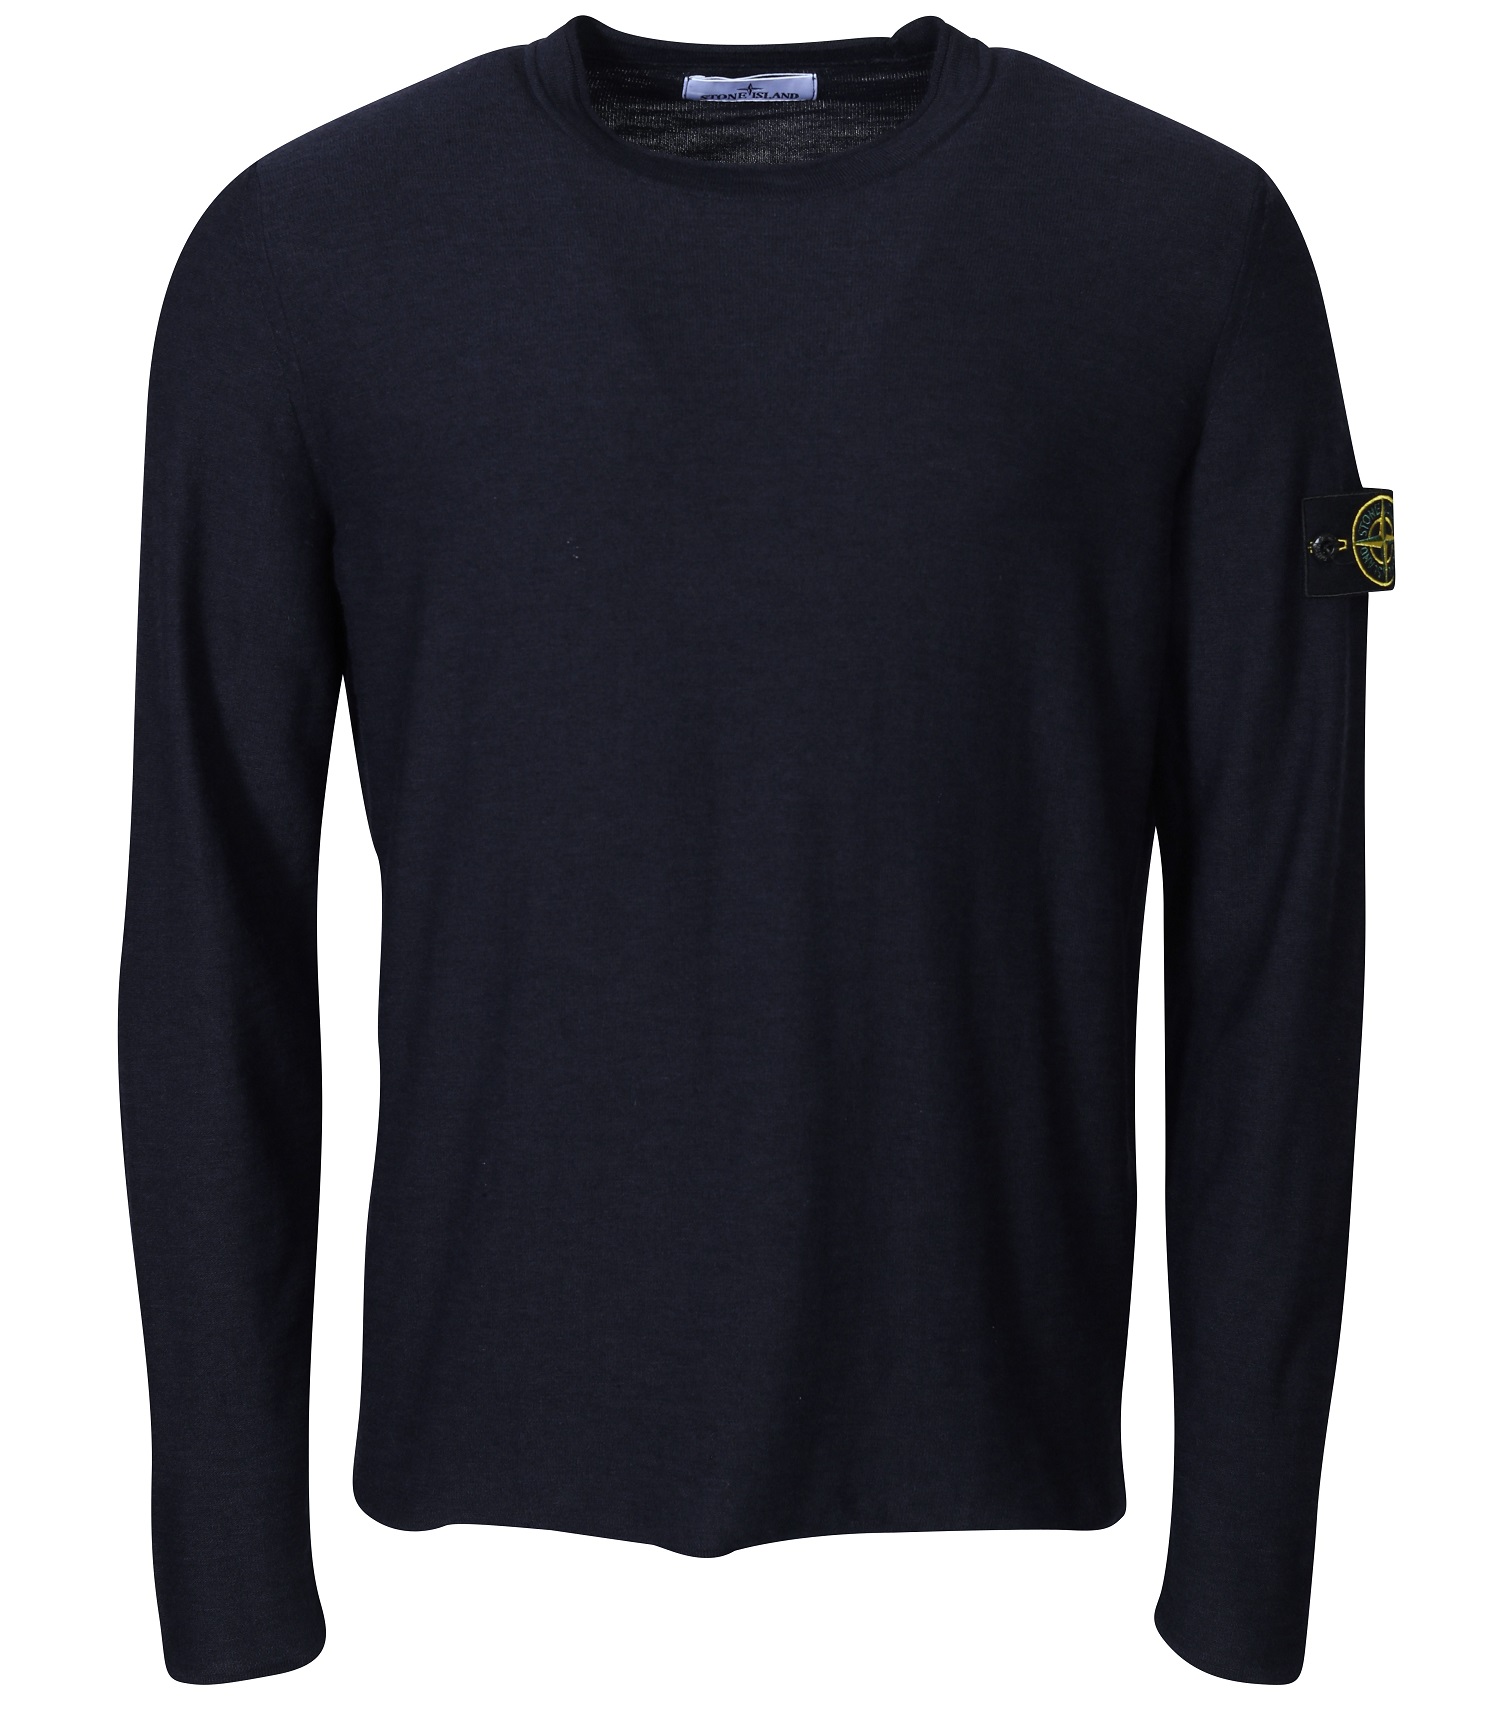 STONE ISLAND Knit Pullover in Navy Blue M